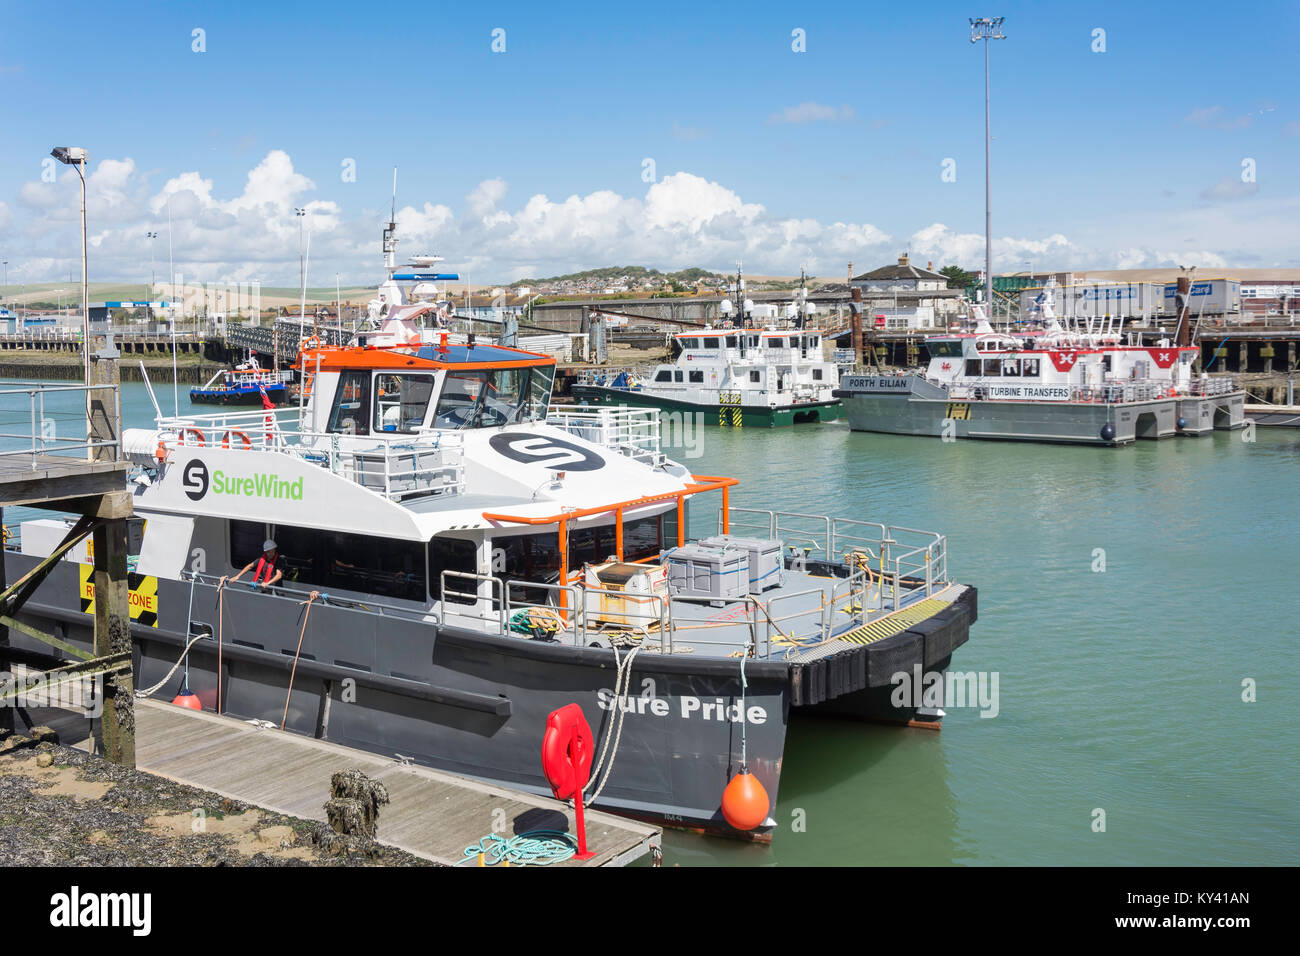 Offshore operations vessel moored on River Ouse, West Quay, Newhaven, East Sussex, England, United Kingdom Stock Photo